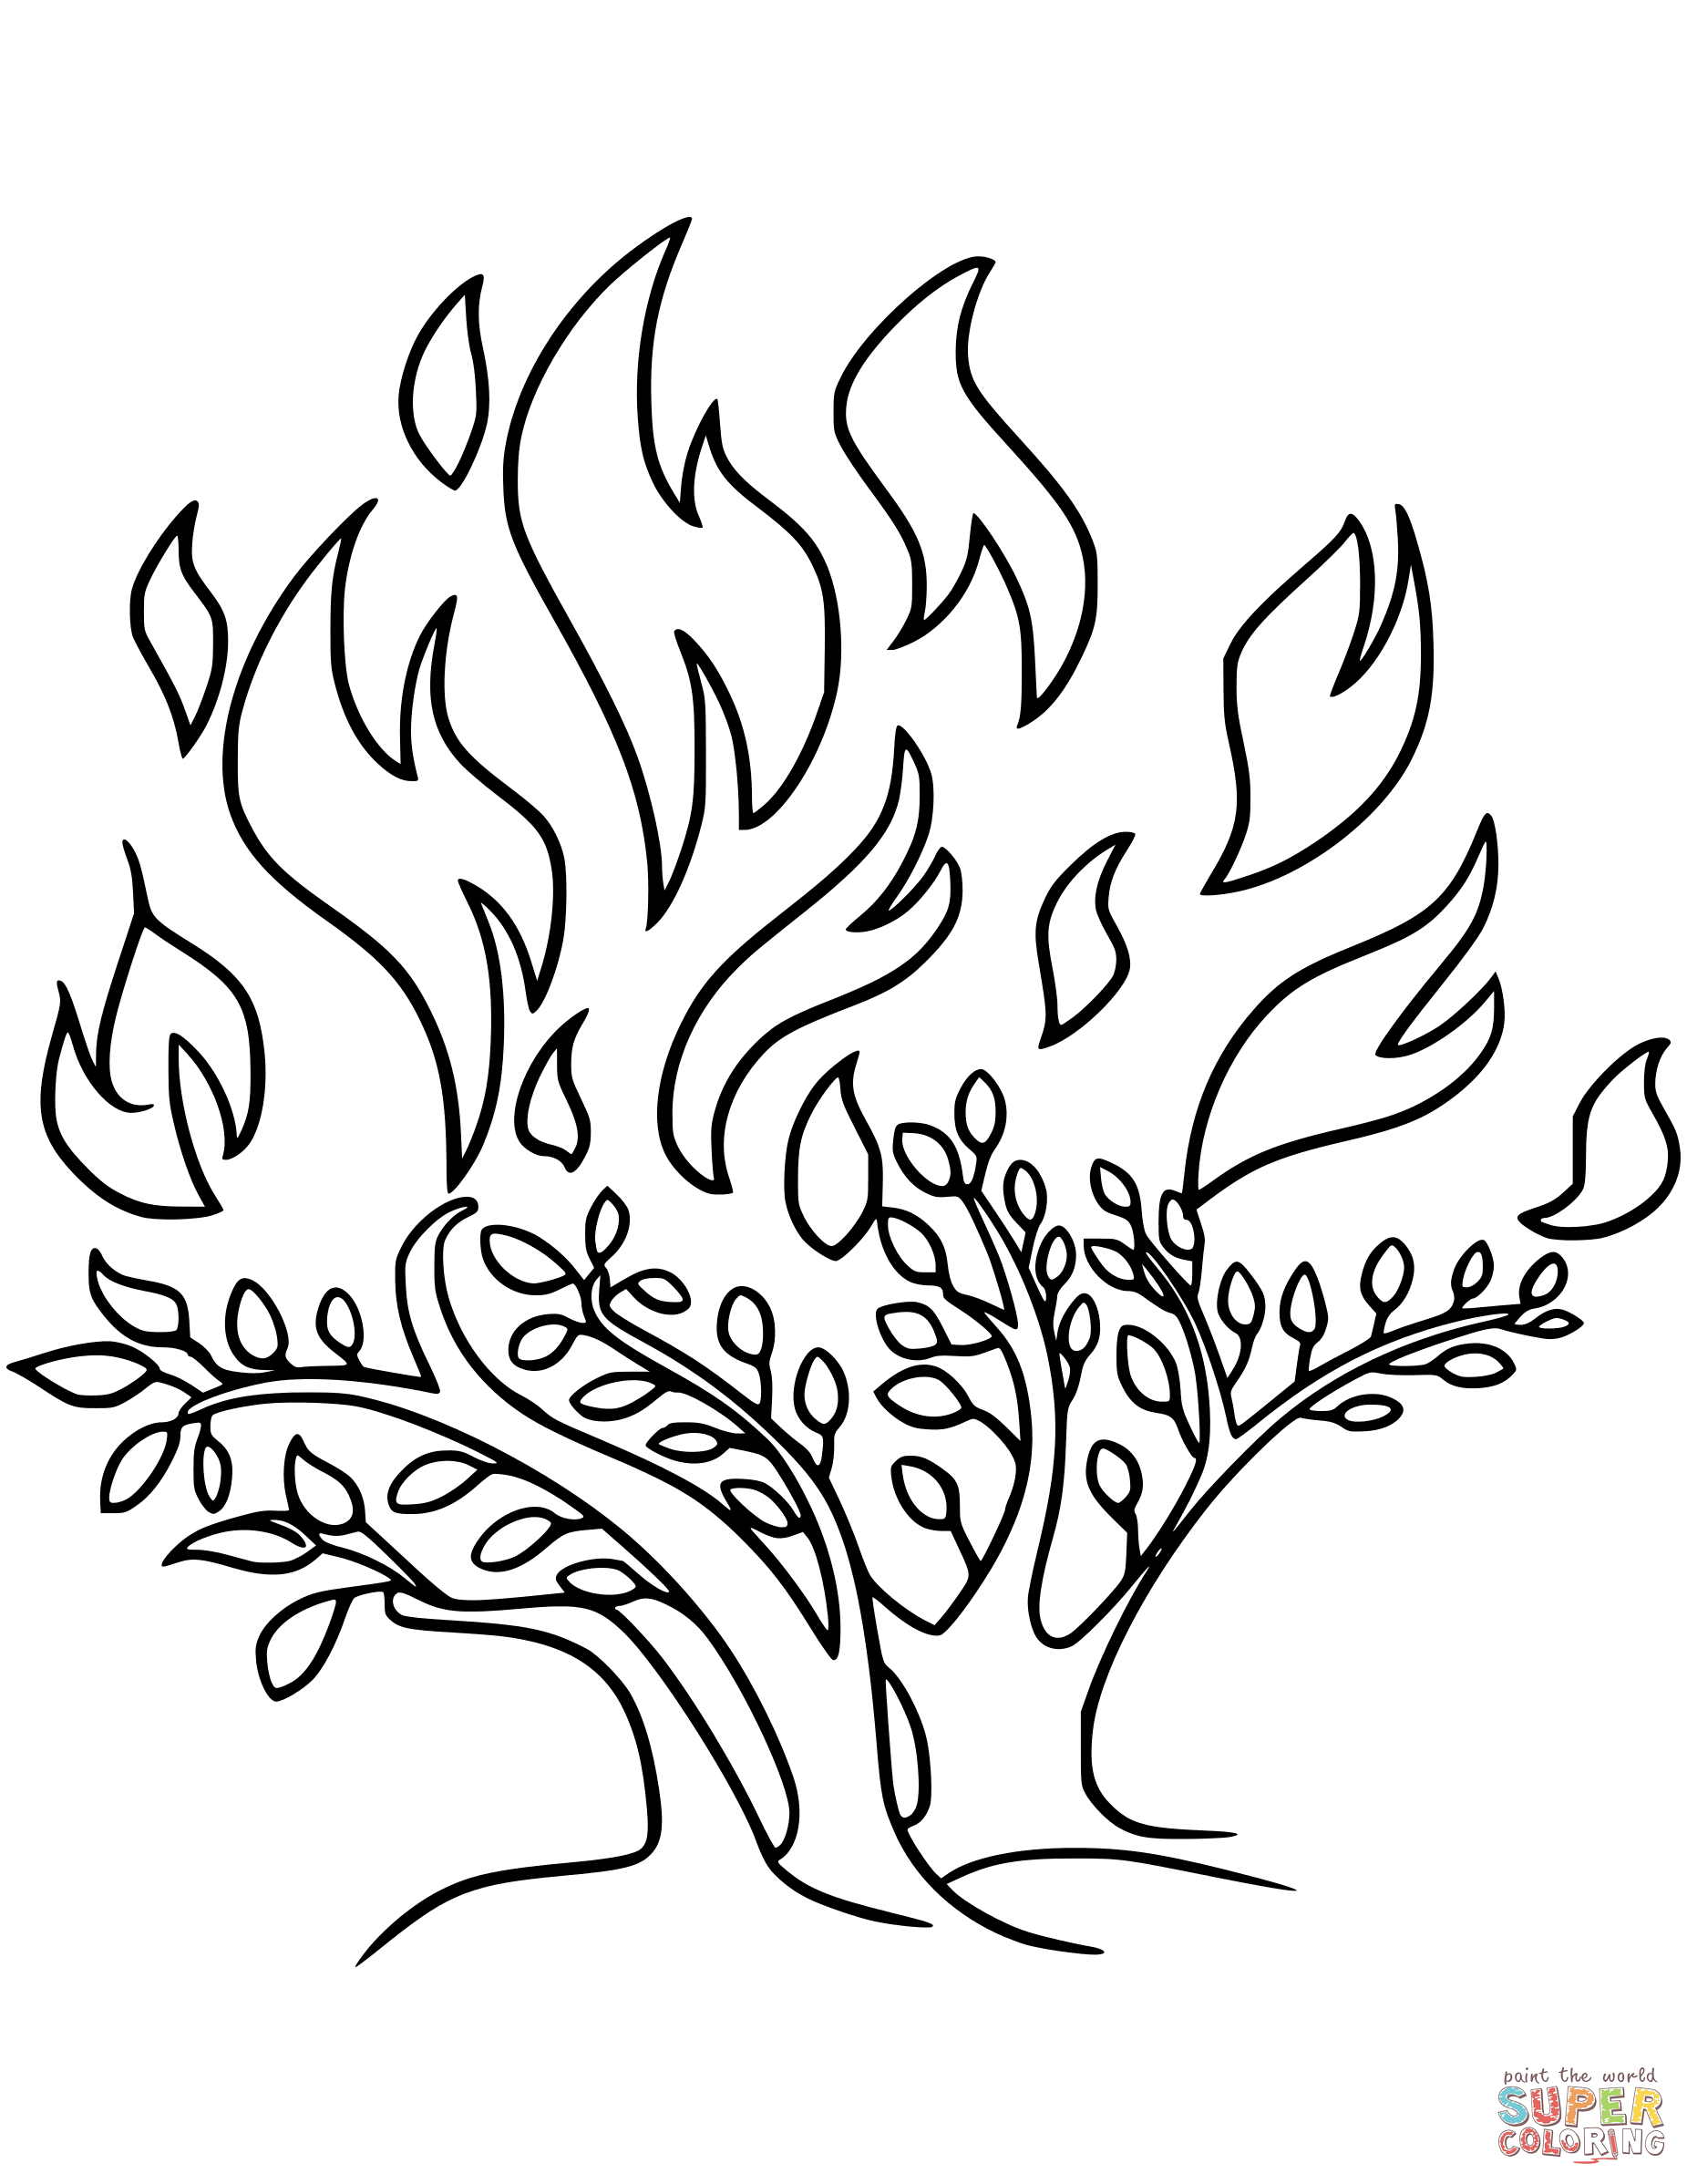 The burning bush coloring page free printable coloring pages